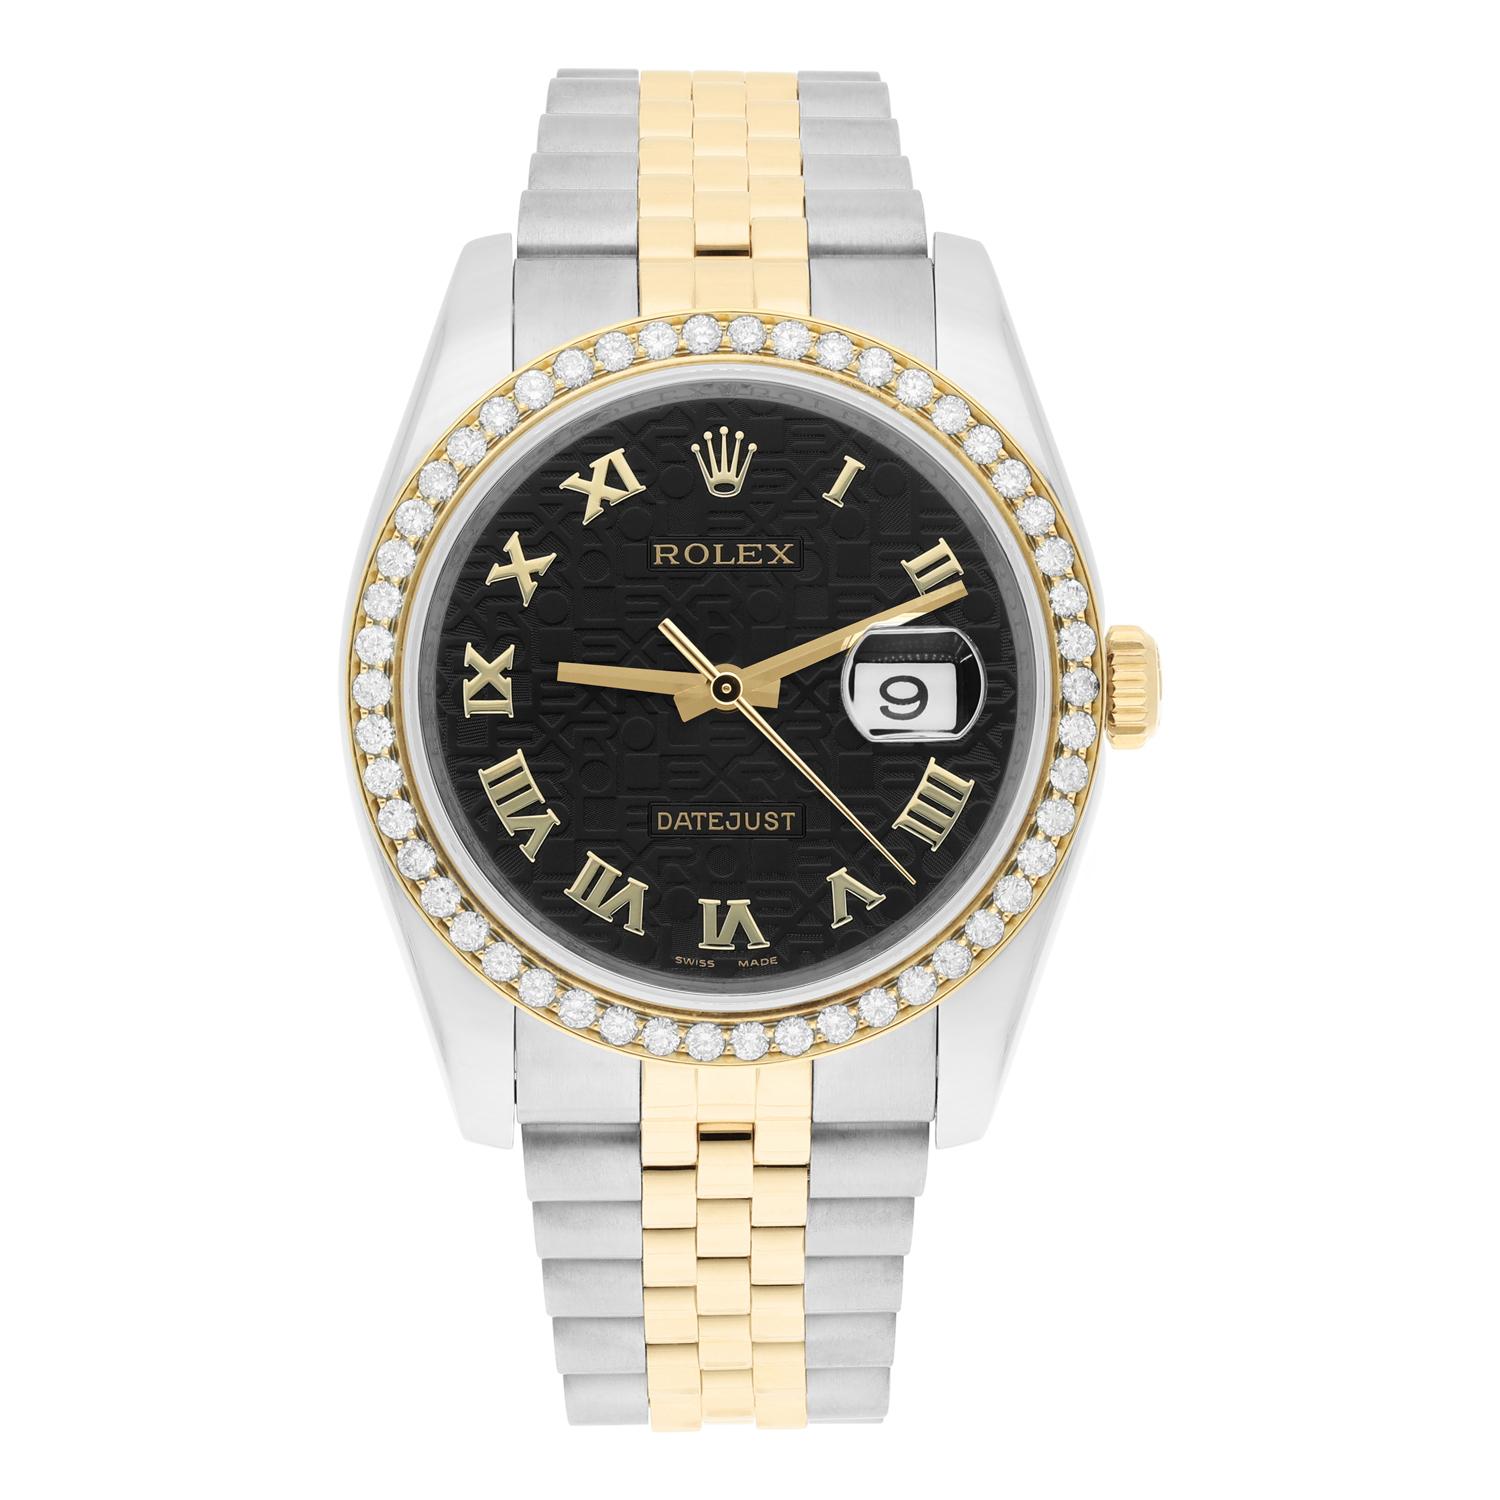 This watch has been professionally polished, serviced and is in excellent overall condition. There are absolutely no visible scratches or blemishes. Authenticity guaranteed! Diamond bezel 18K gold plated, custom diamond set. Diamonds are 100%